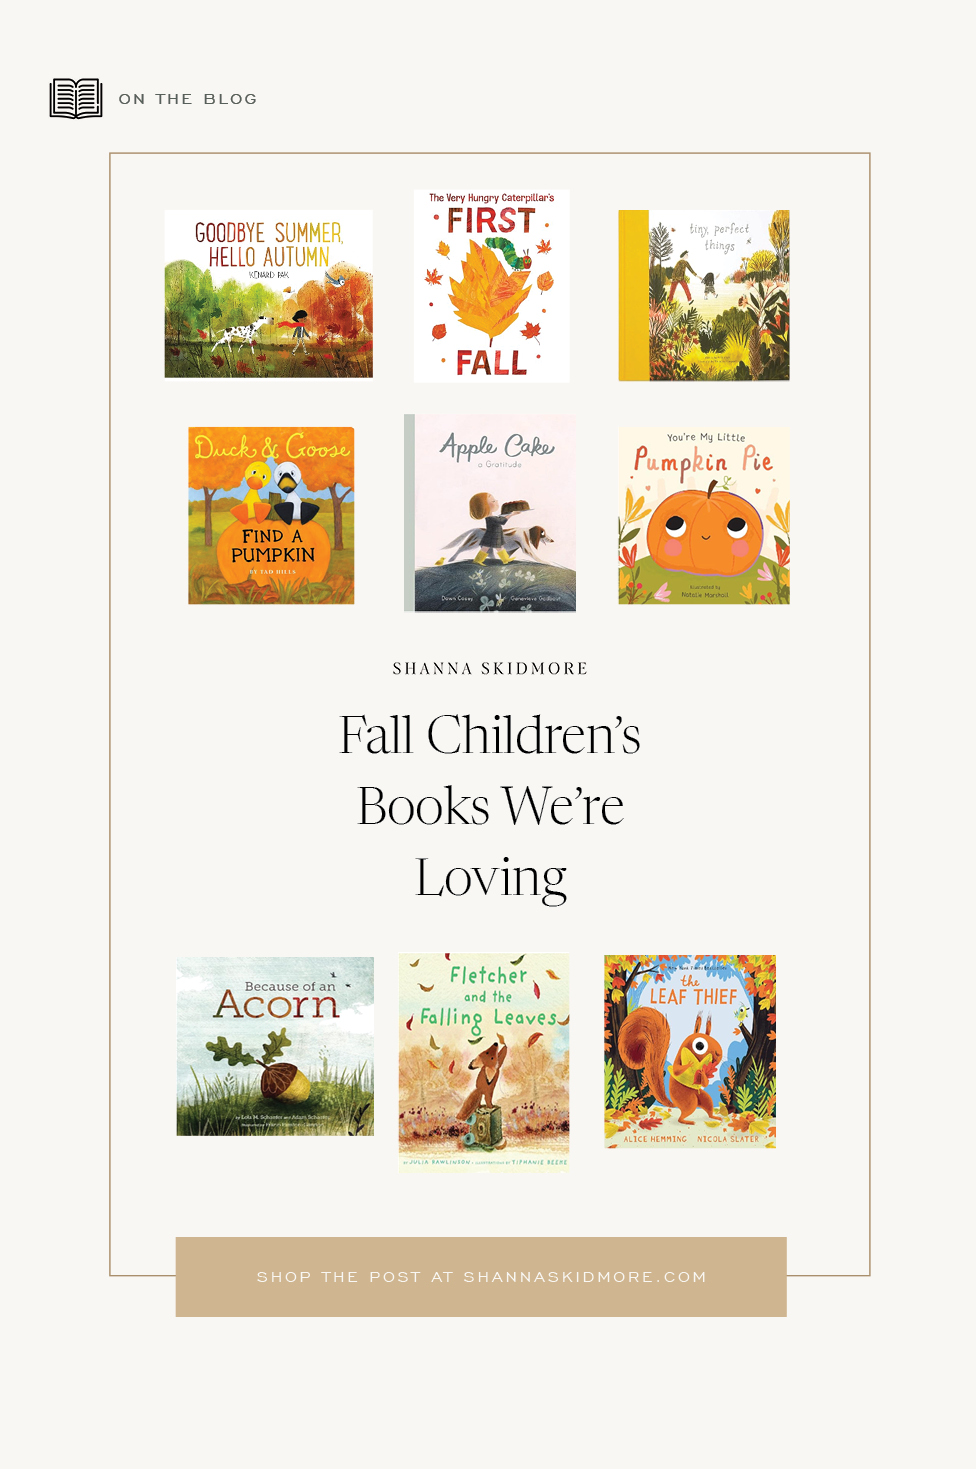 Tan Background with Collage of Children's Books Caption: Fall Children's Books We're Loving